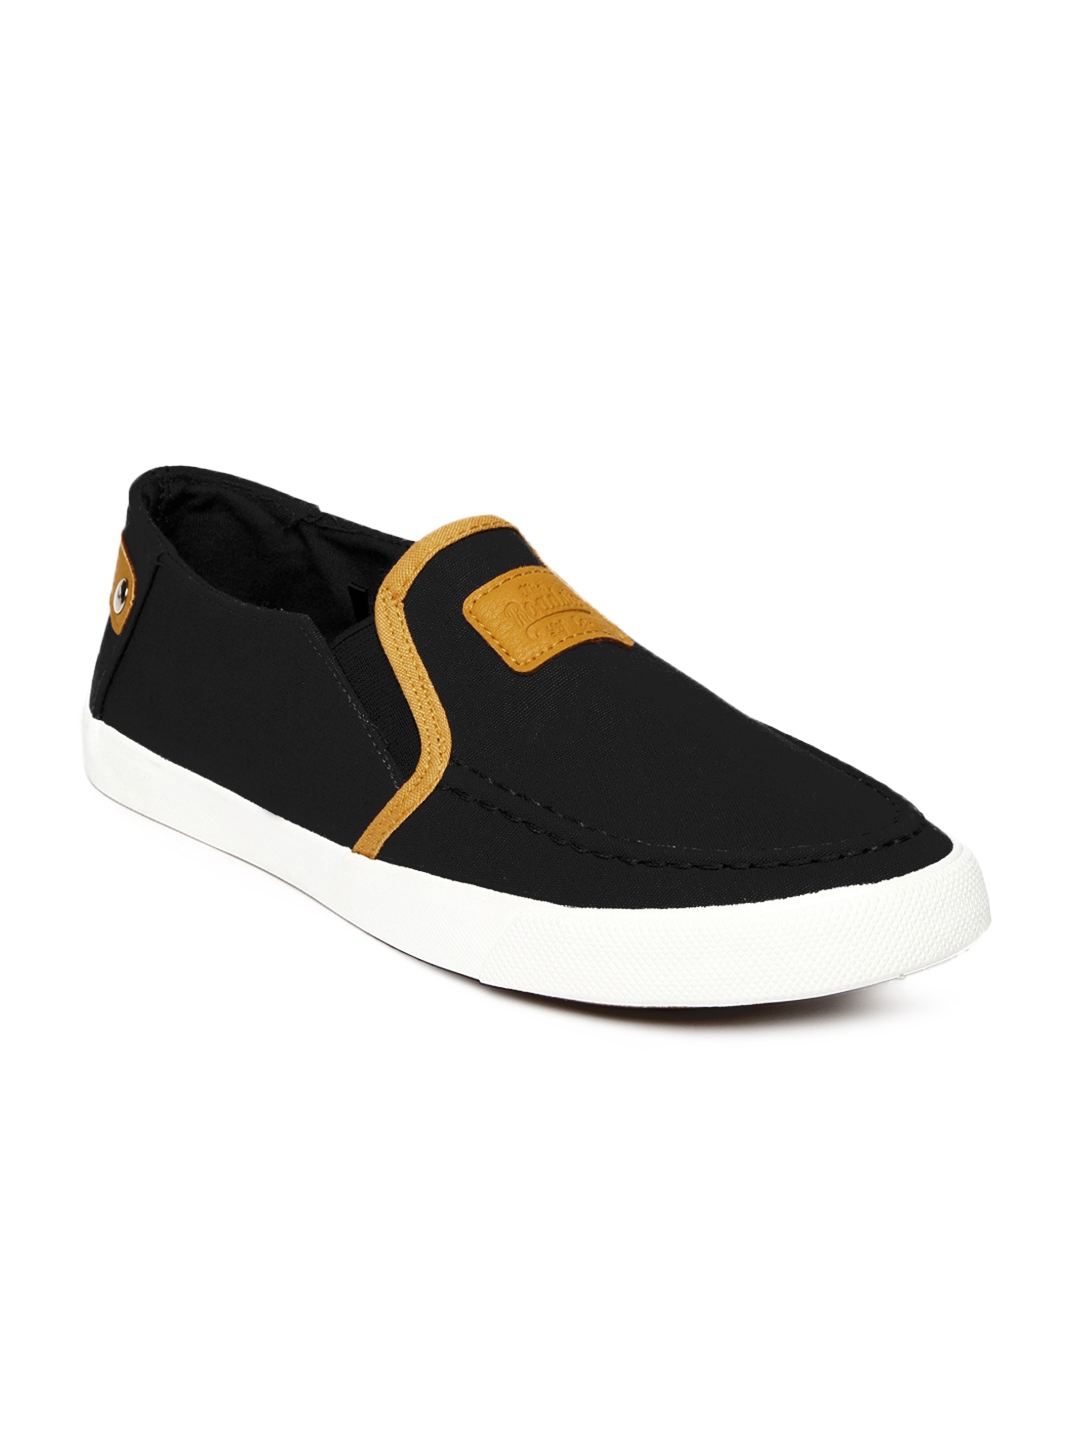 Buy Roadster Men Black Casual Shoes - Casual Shoes for Men 745783 | Myntra